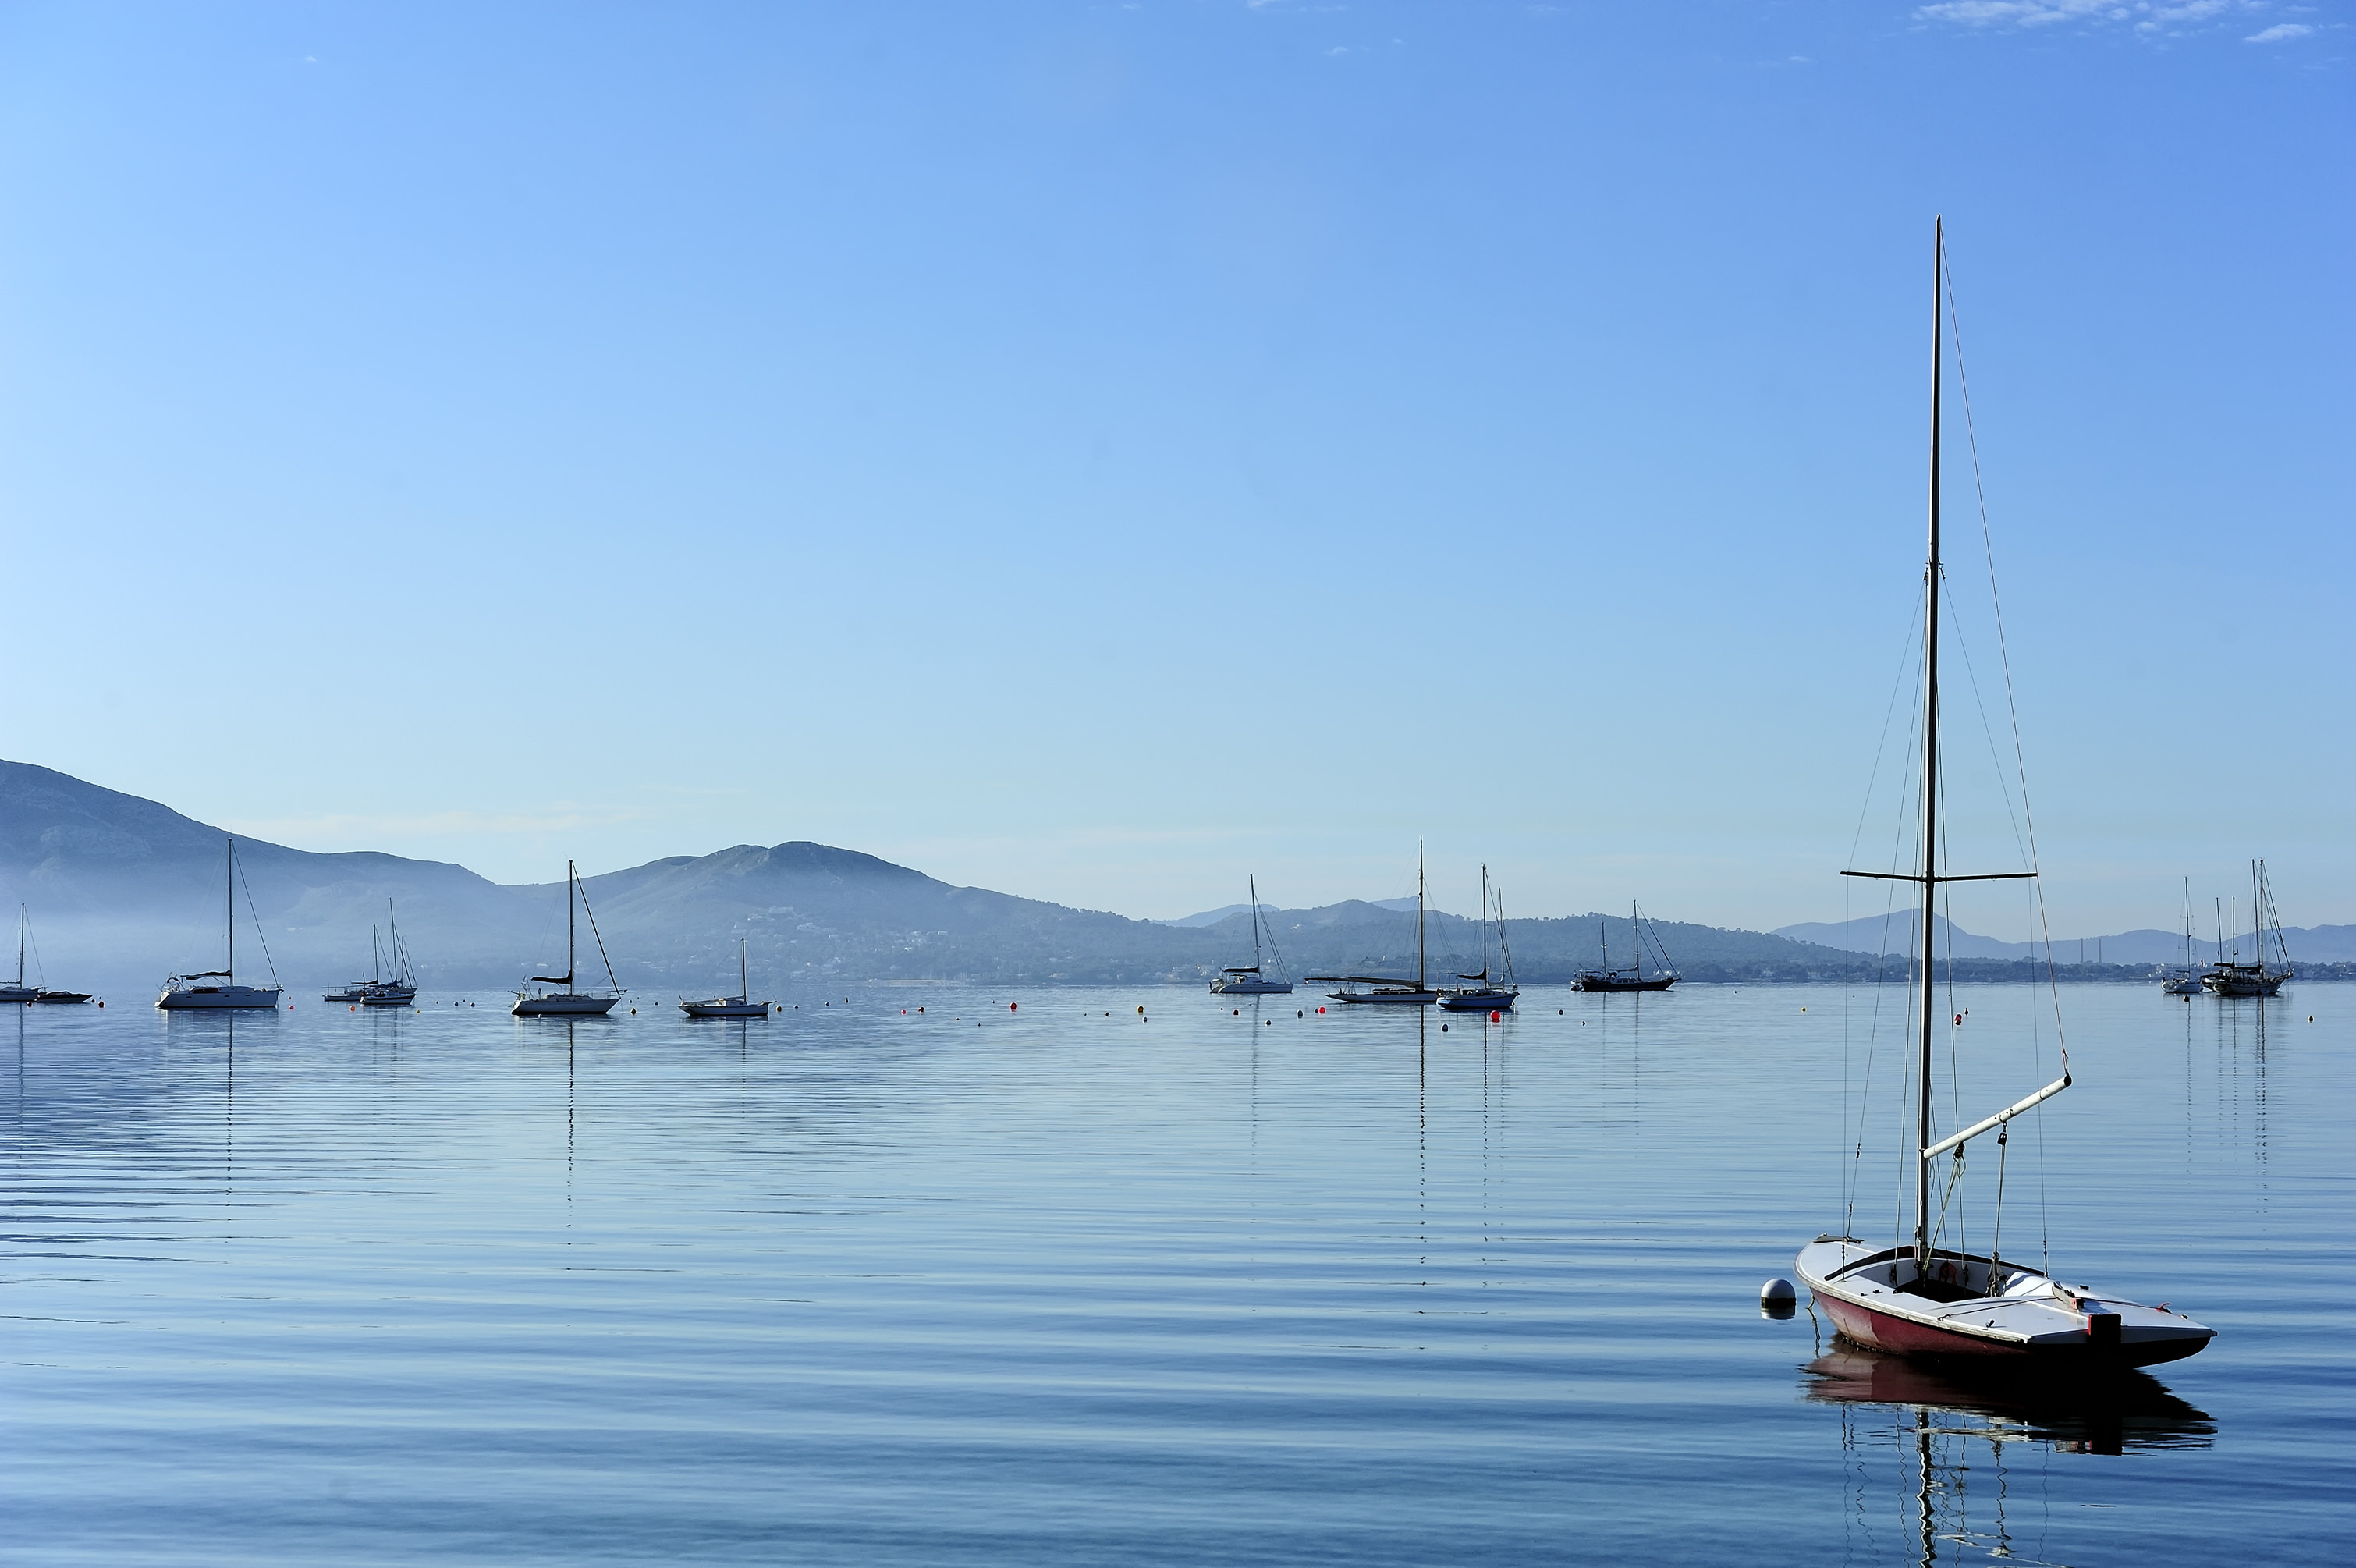 One of the reasons to buy a property in Pollensa is its beautiful port